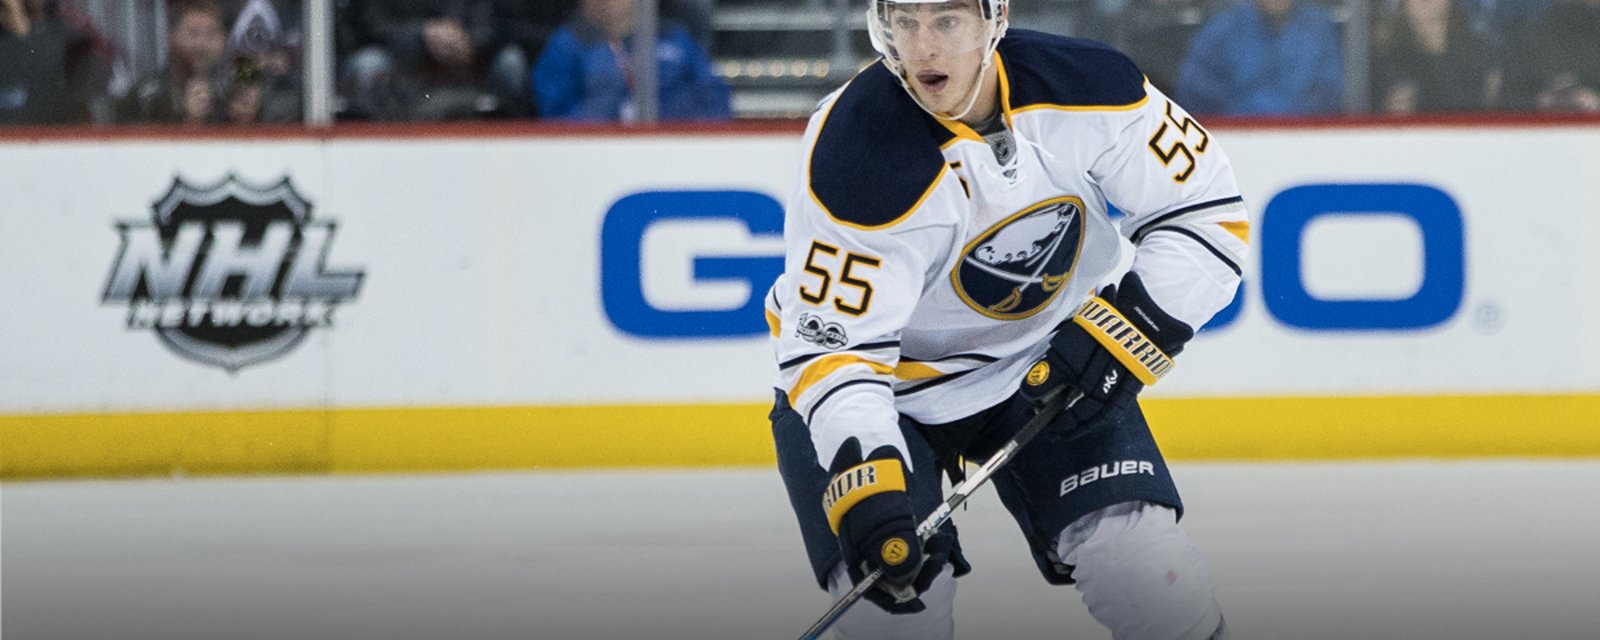 Report: Ristolainen may be injured